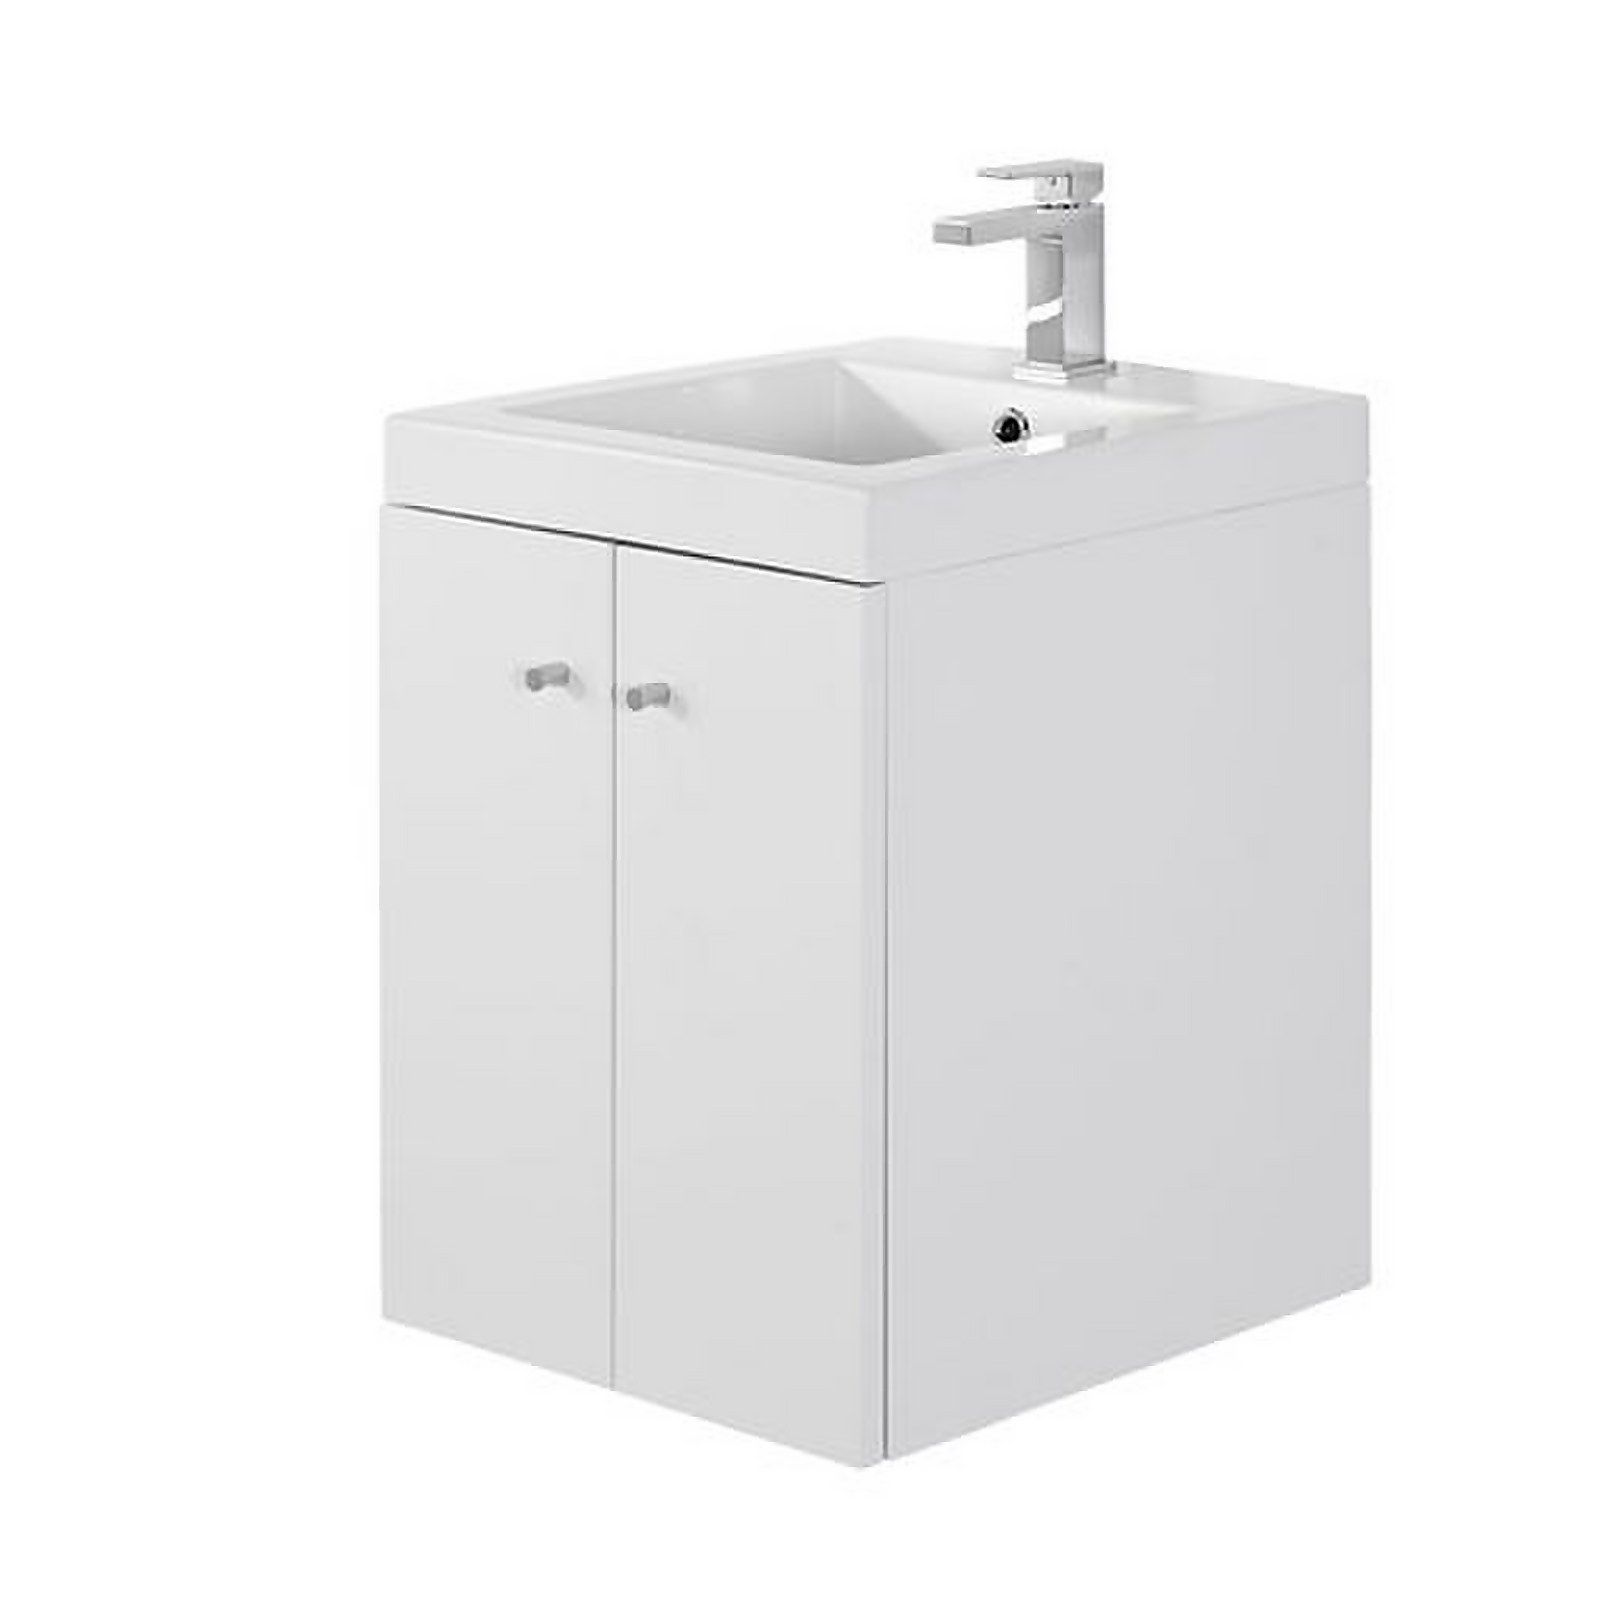 Photo of Bathstore Alpine Duo 400mm Basin And Wall Hung Vanity Unit - Gloss White